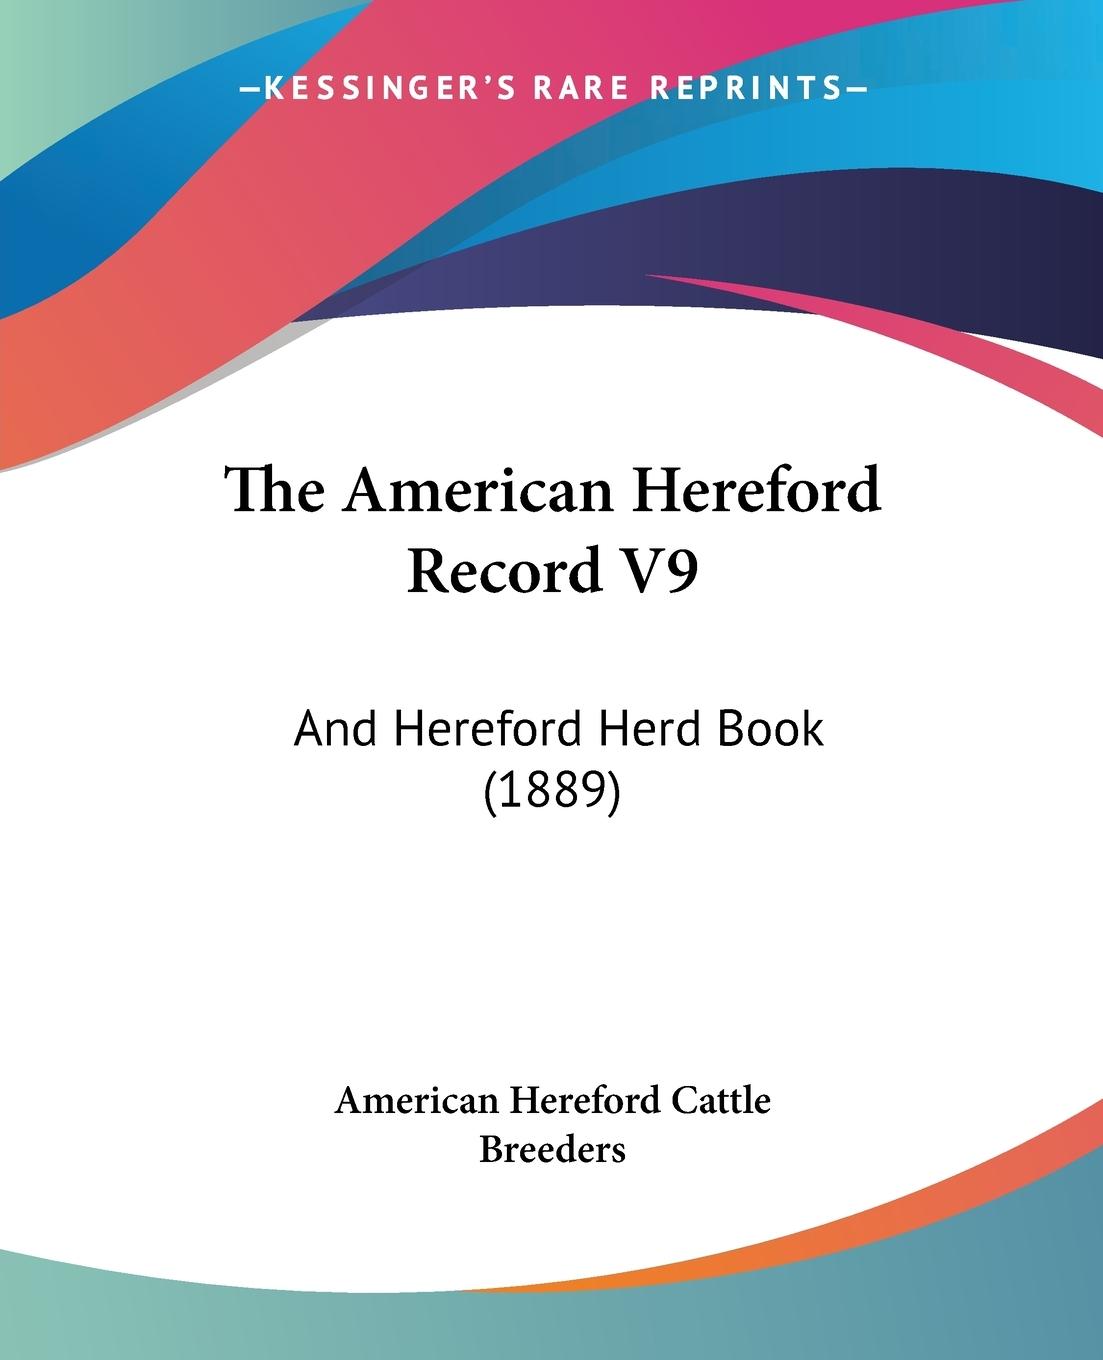 The American Hereford Record V9 - American Hereford Cattle Breeders